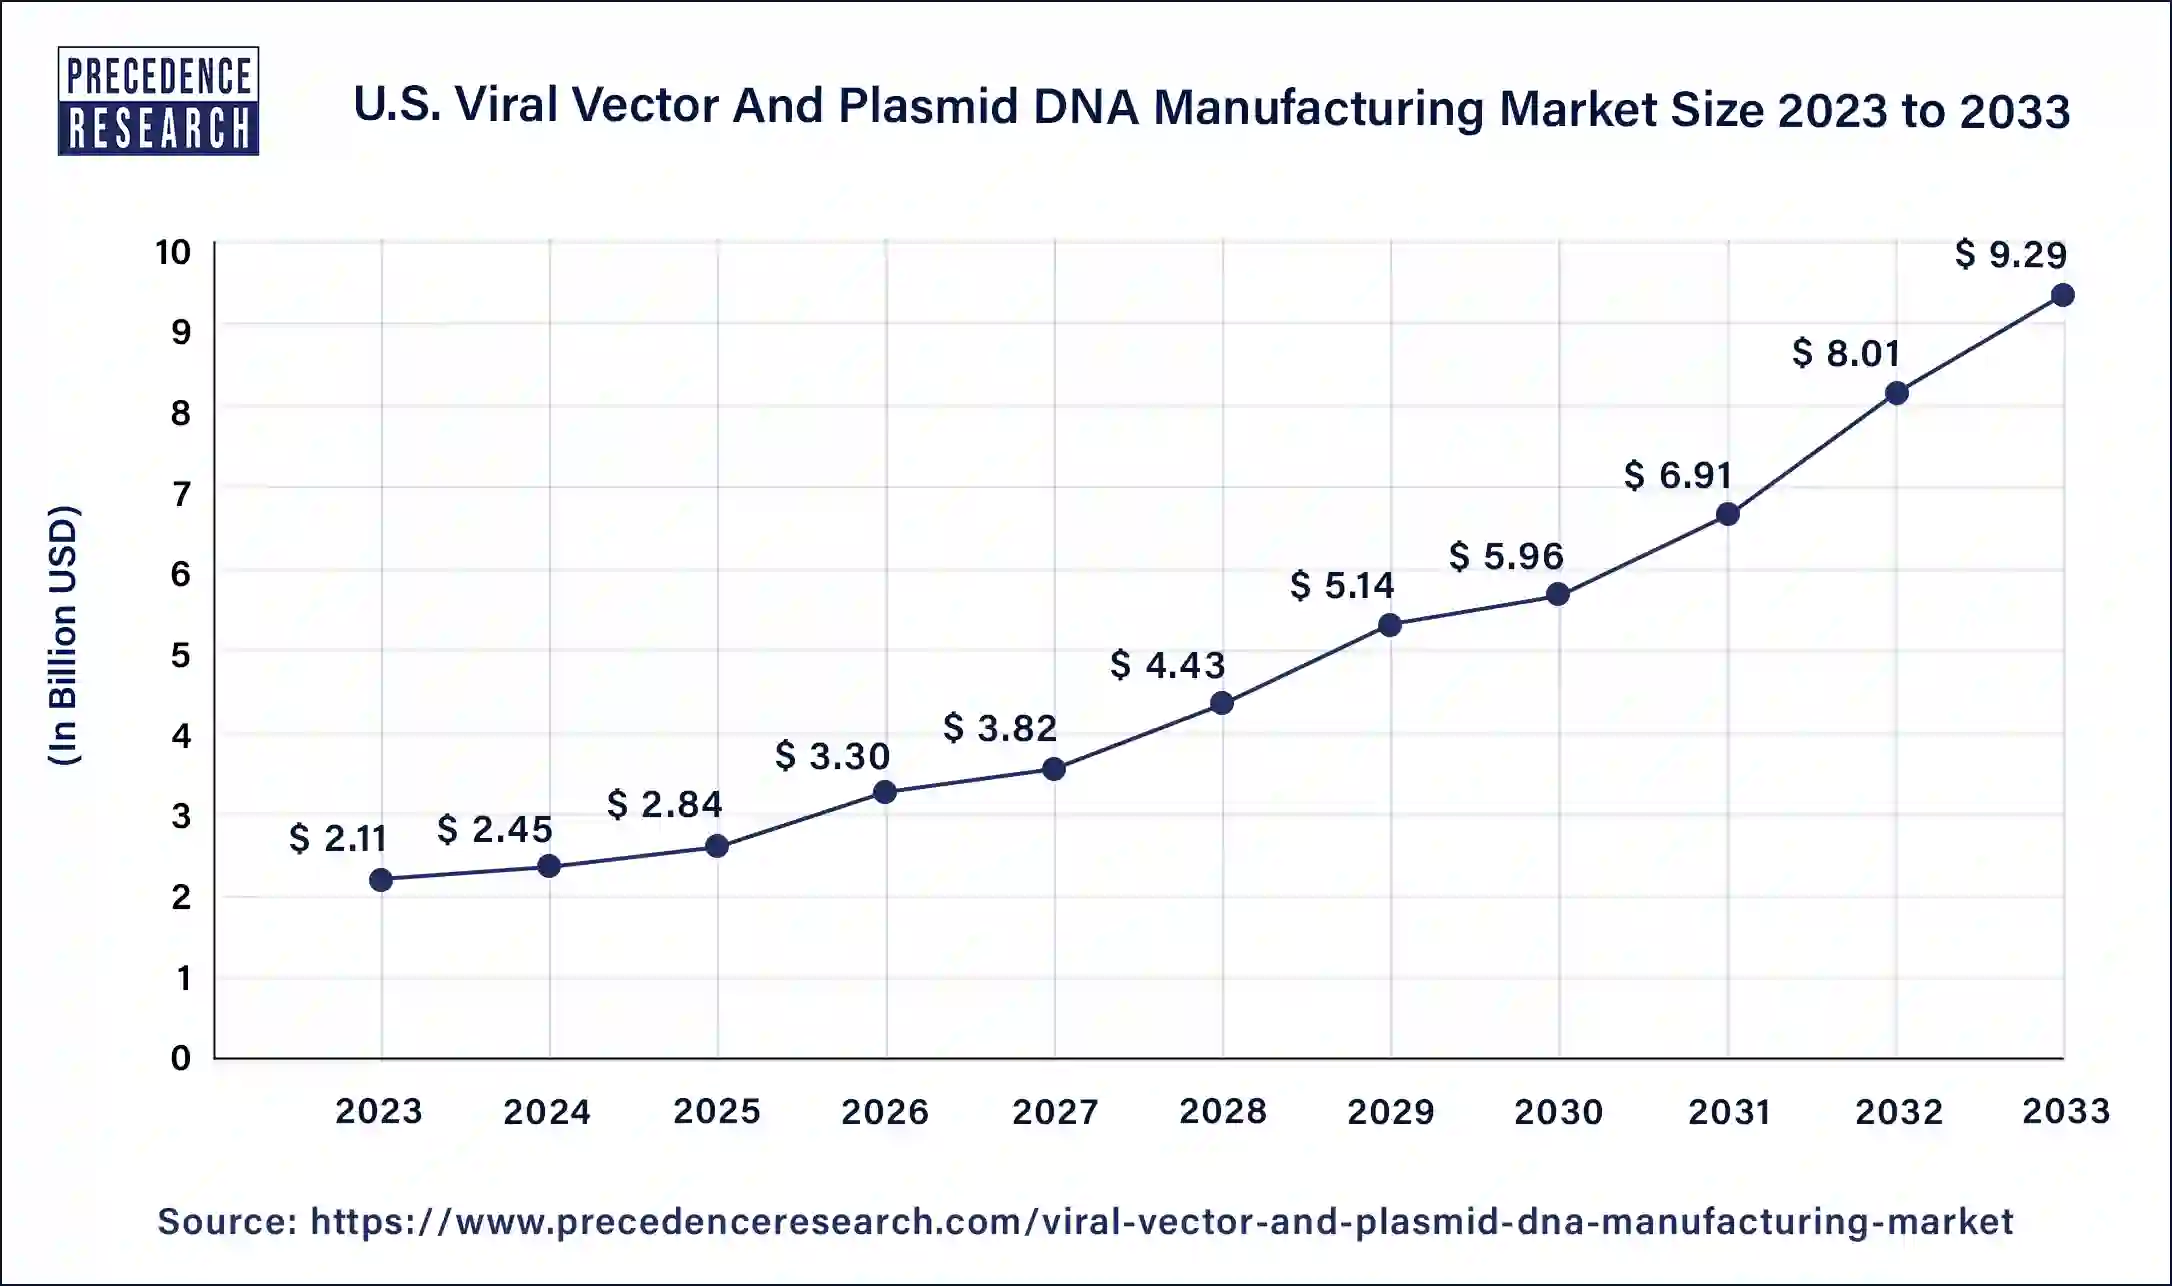 U.S. Viral Vectors and Plasmid DNA Manufacturing Market Size 2024 to 2033